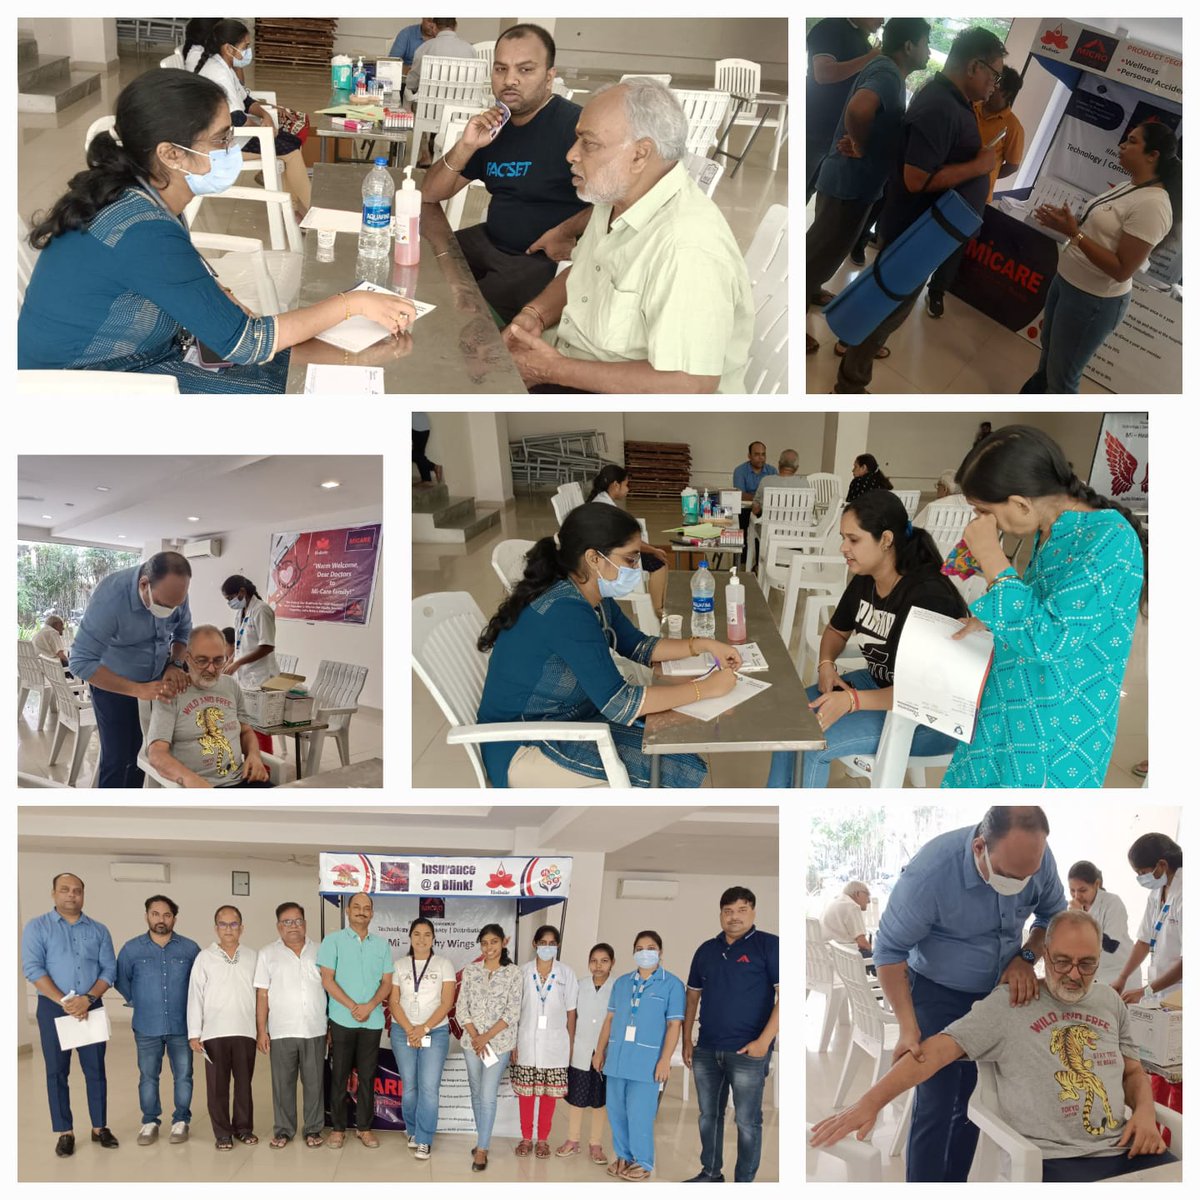 Event Highlights from May 18th at Armsburg Koundinya Society-Suchitra!
 
We are thrilled to share some moments from our successful health camp held at Armsburg Koundinya Society-Suchitra, on May 18th as part of our I2U2 (Insurance to Underprivileged) initiative.